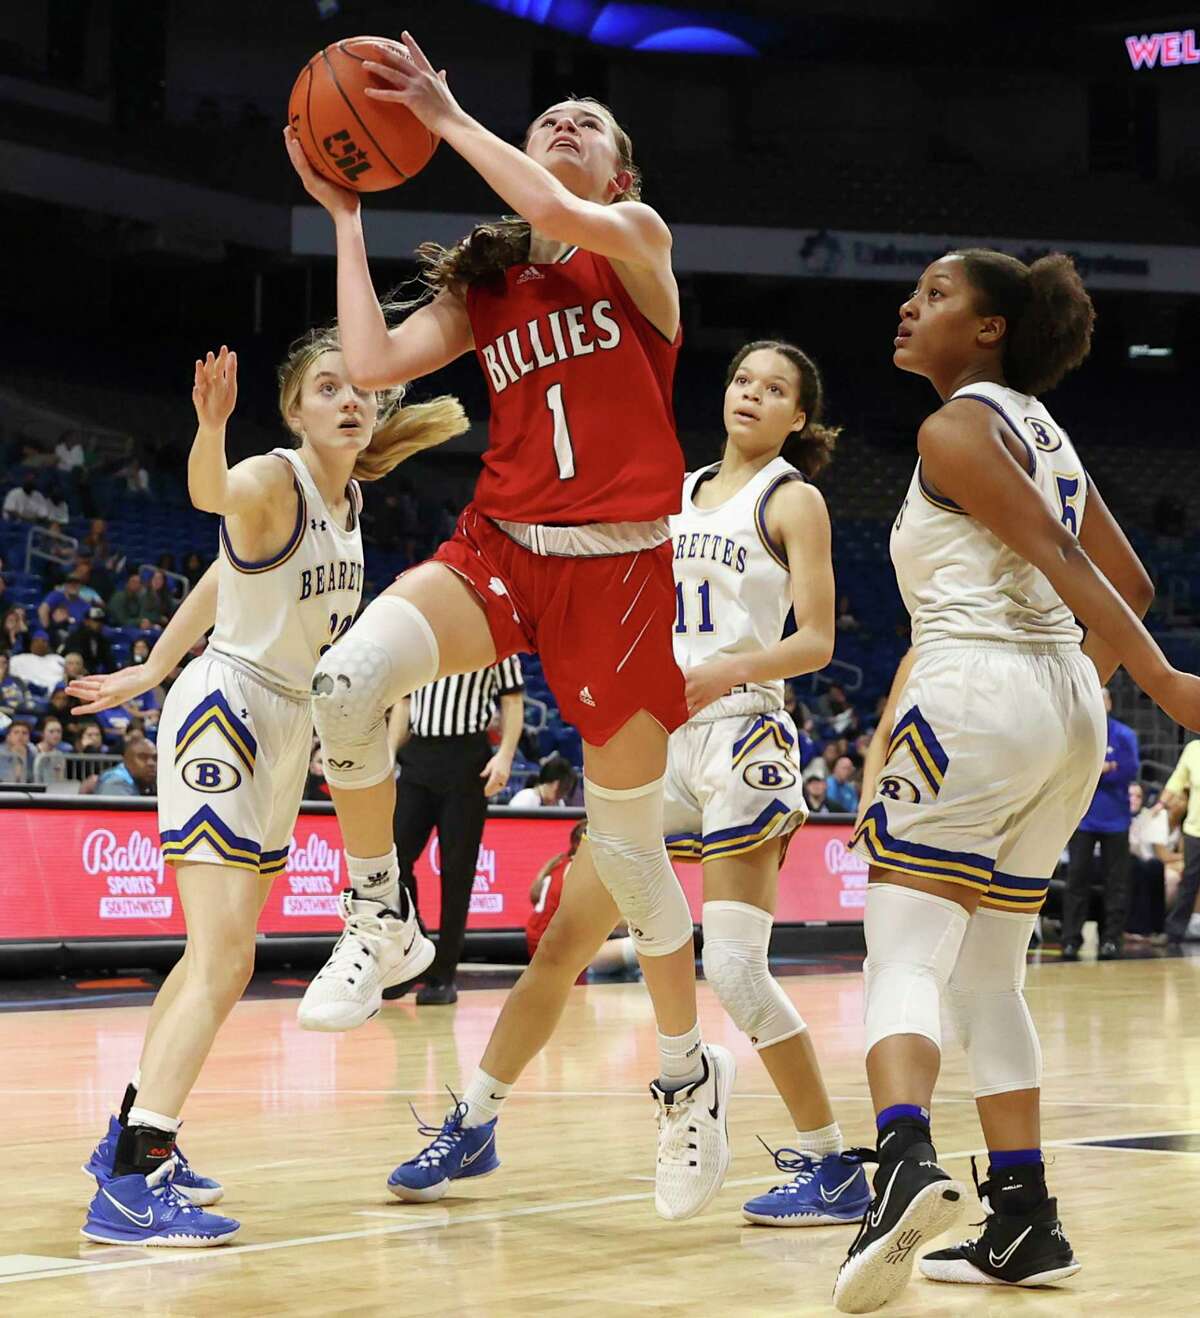 Fredericksburg's Taylor Grona (01) splits a trio of Brownsboro defenders for a score in the UIL Class 4A girls basketball semifinal game at the Alamodome on Friday, Mar. 4, 2022. Brownsboro won, 60-41, to end Fredericksburg's state run in the semifinals.